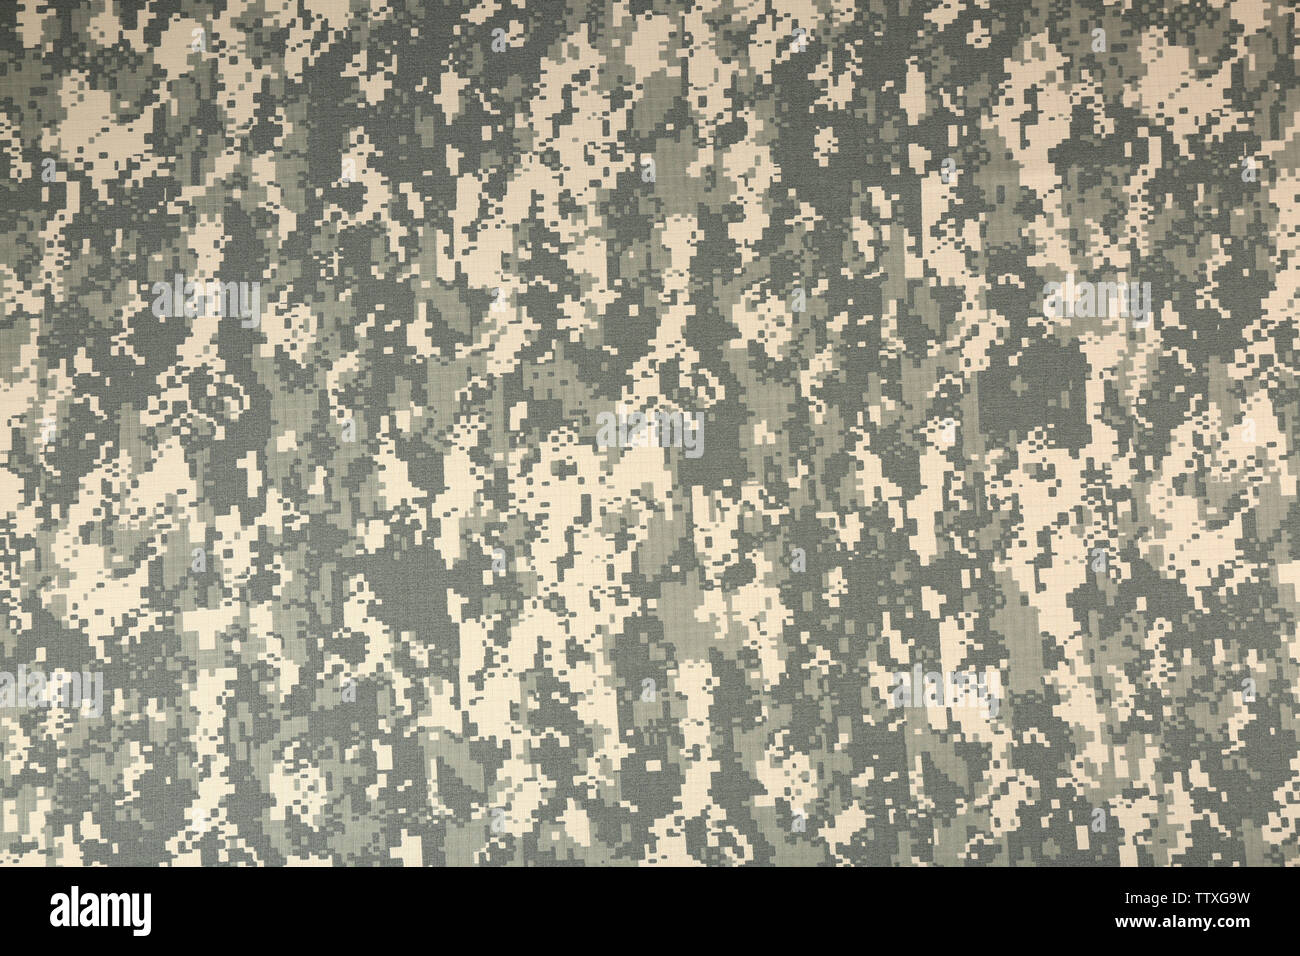 Camouflage fabric texture background Stock Photo